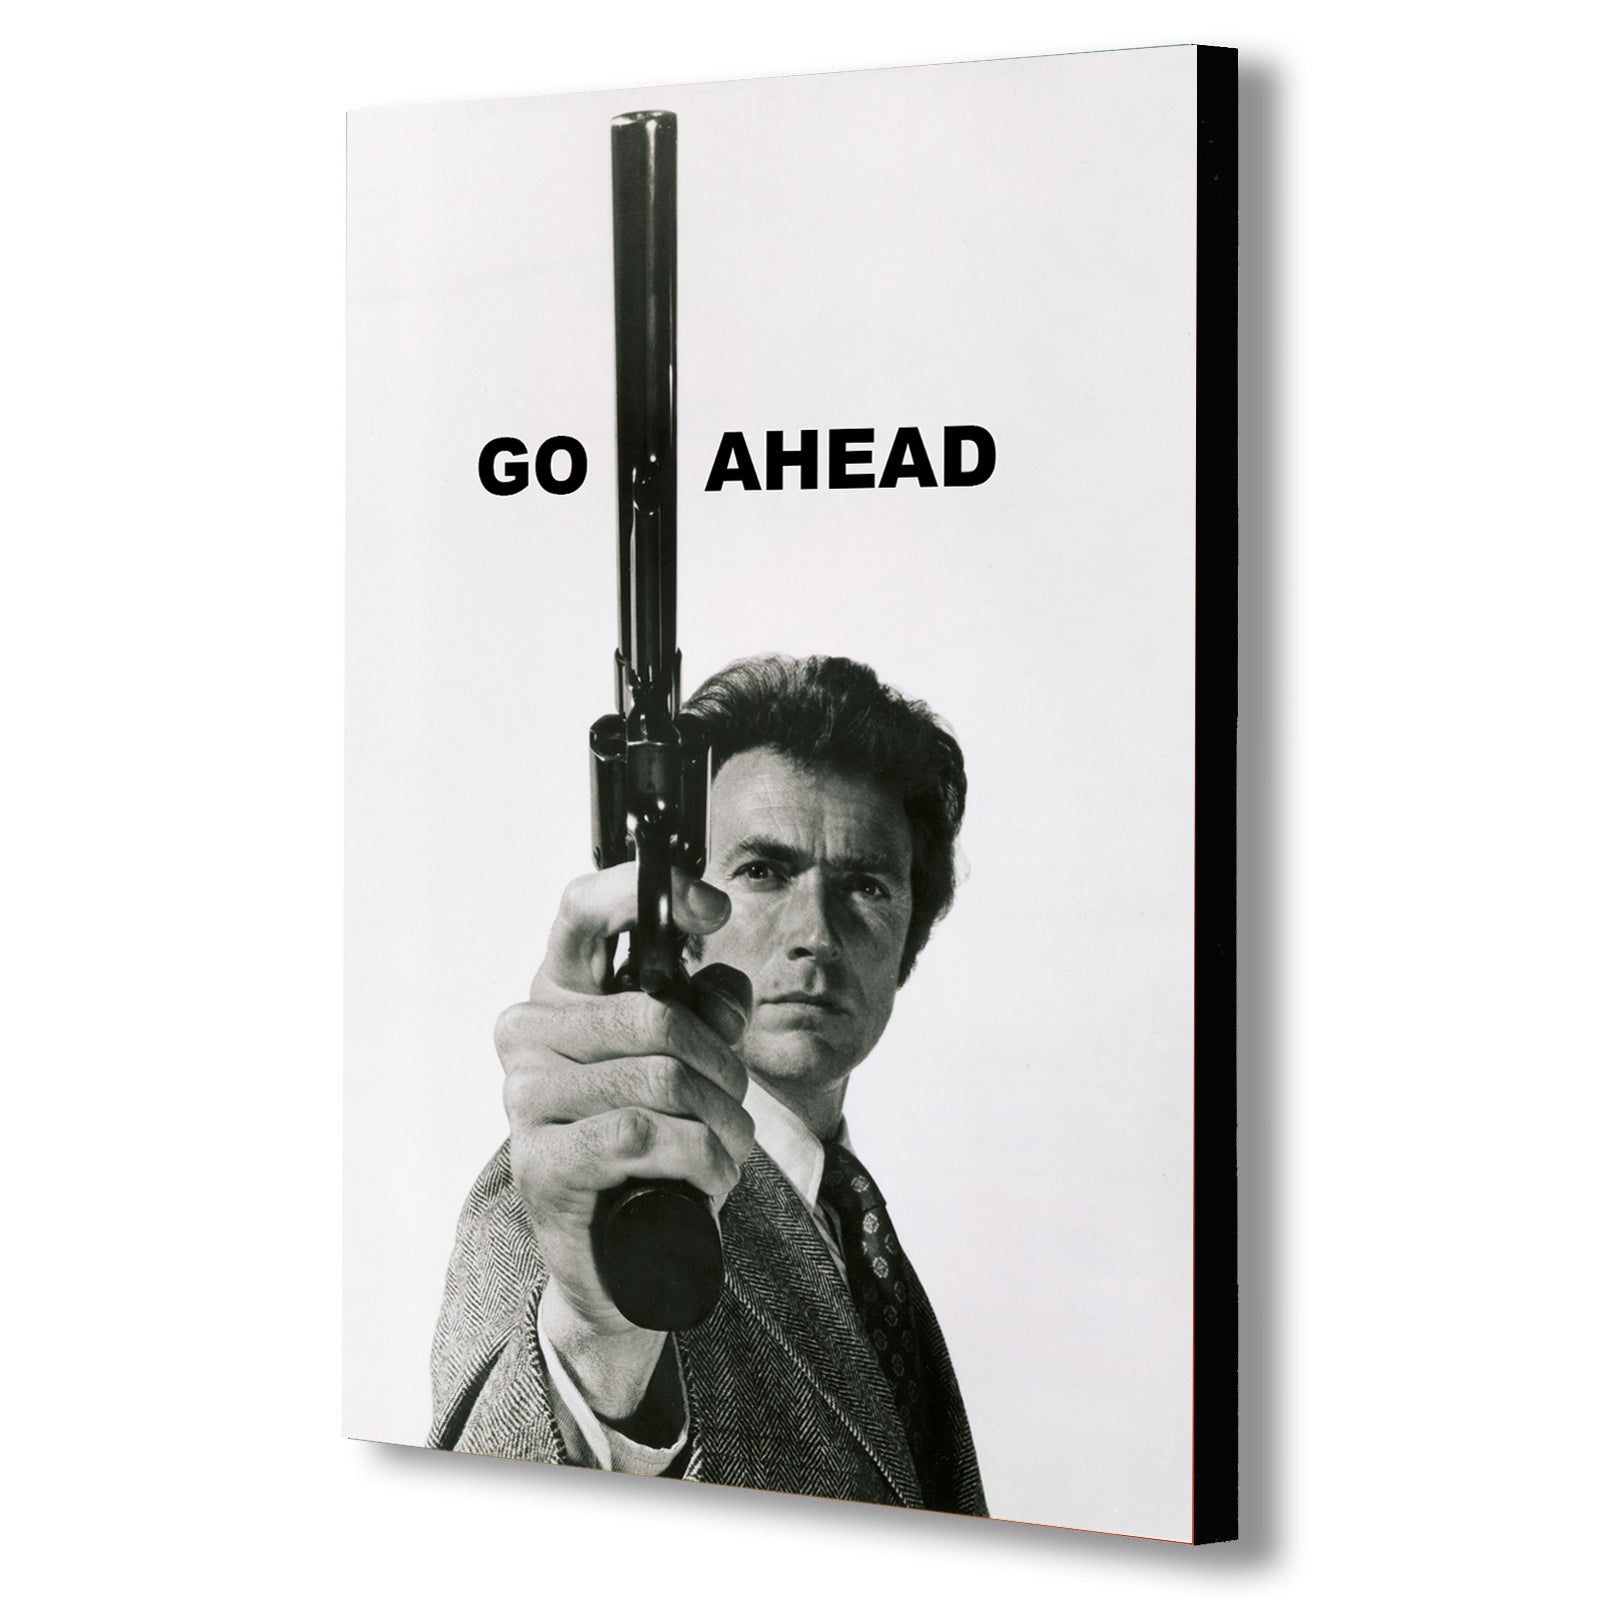 Clint Eastwood As Dirty Harry - Canvas Wall Art Framed Print - Various Sizes